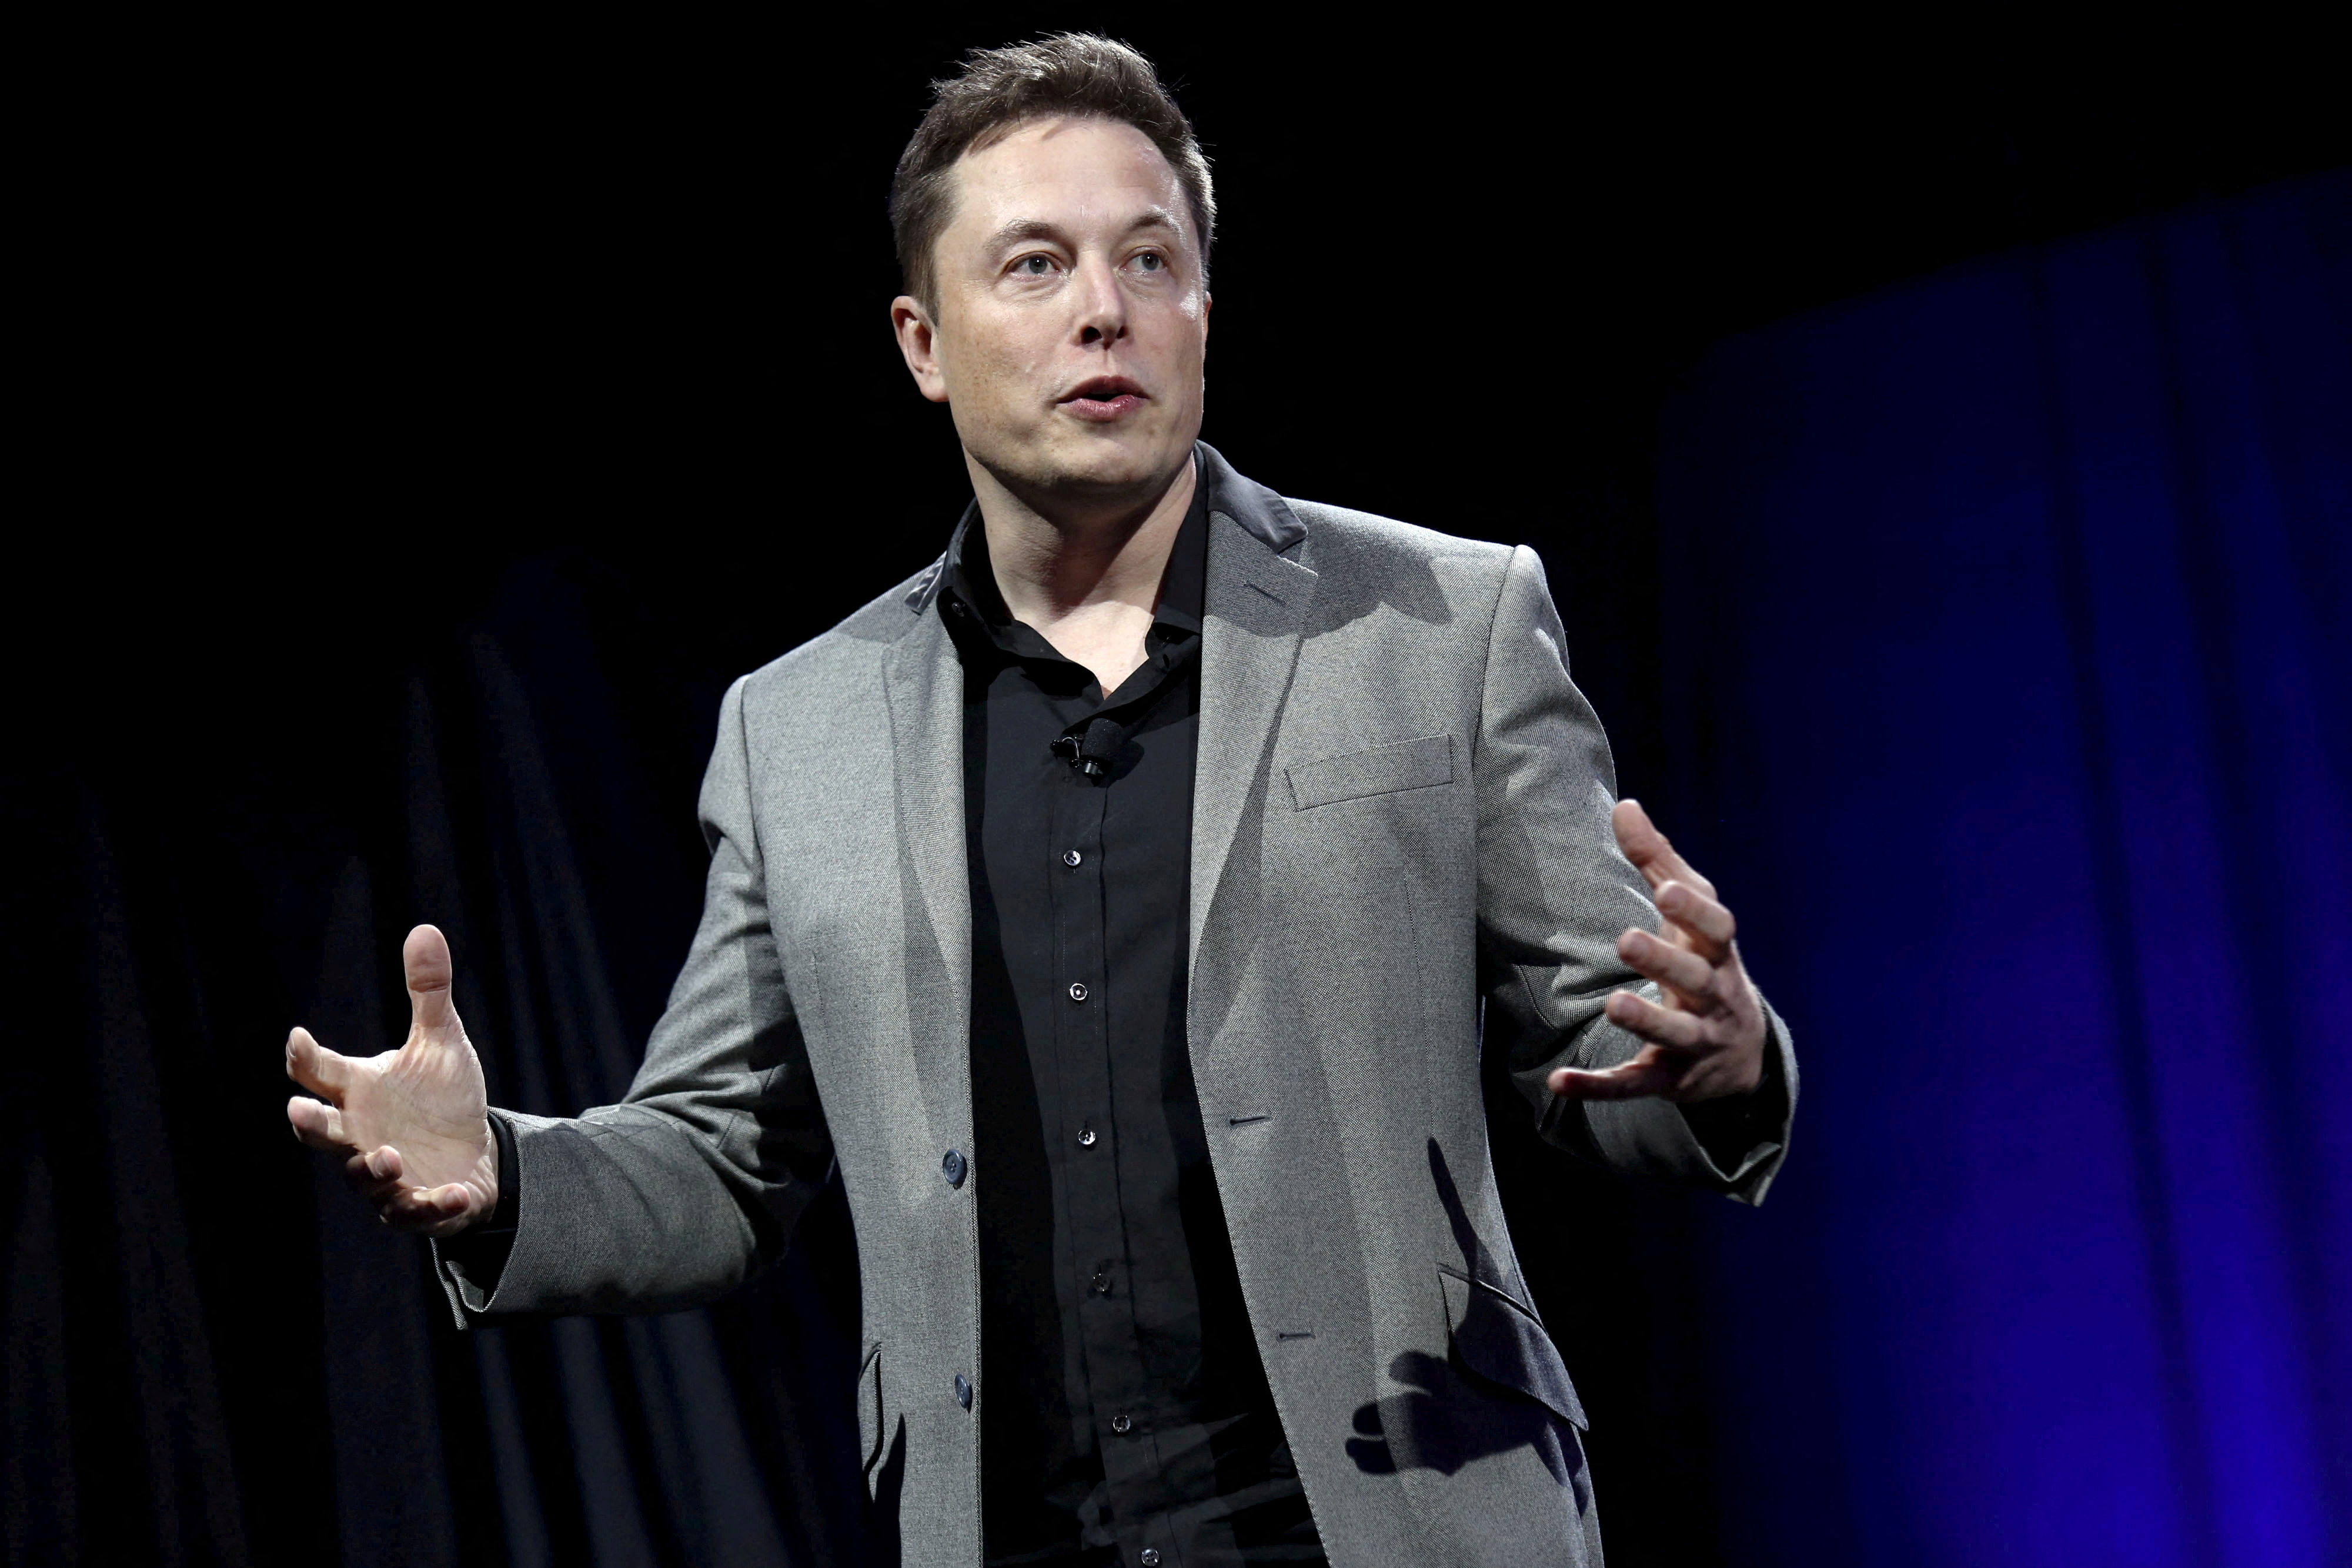 Tesla CEO Elon Musk reveals the Tesla Energy Powerwall Home Battery during an event in Hawthorne, California